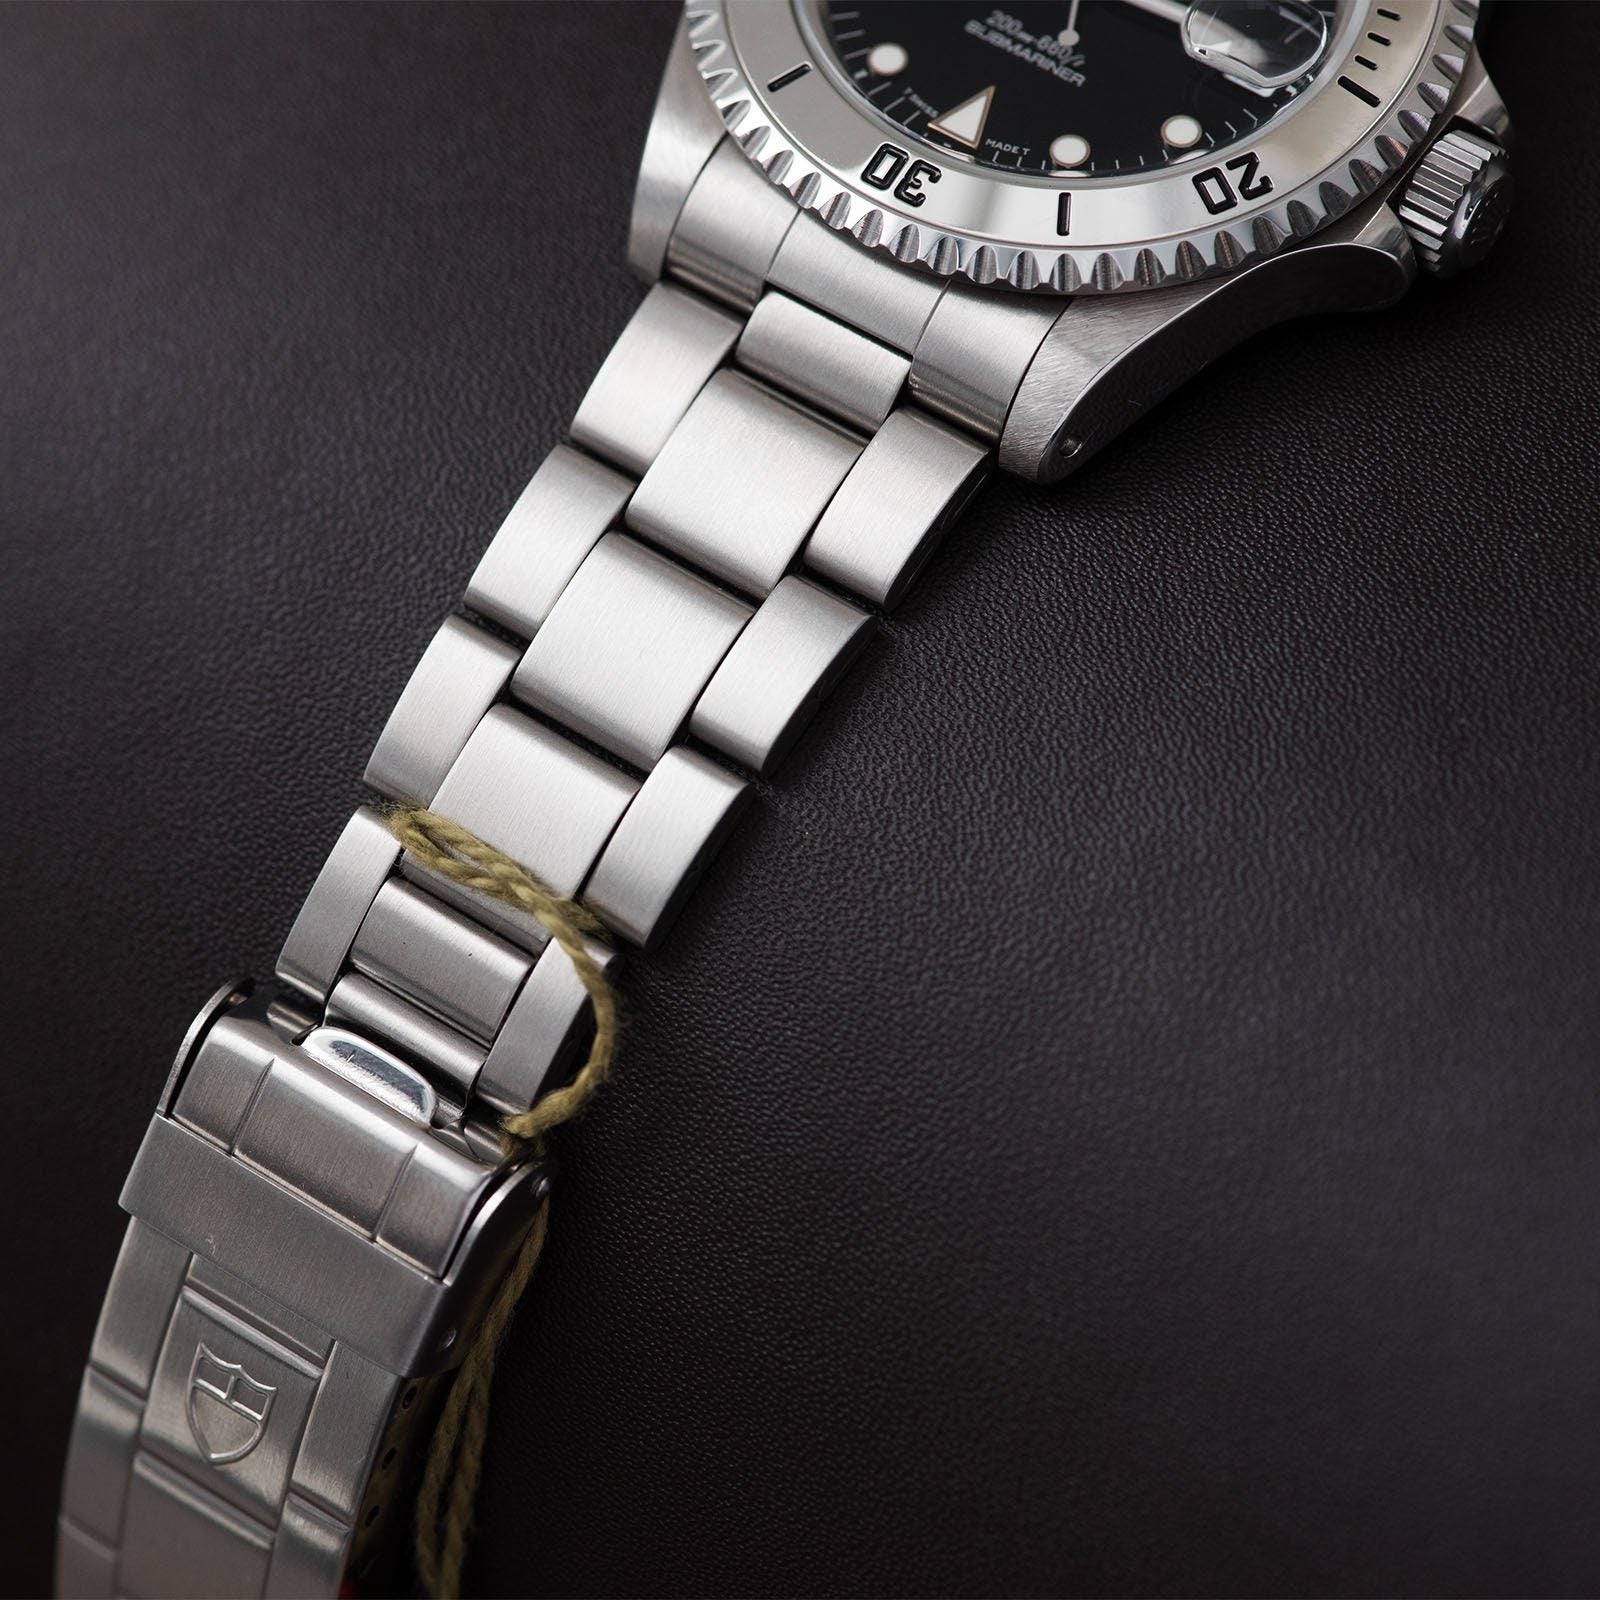 Tudor Submariner Prince Date Reference 79190